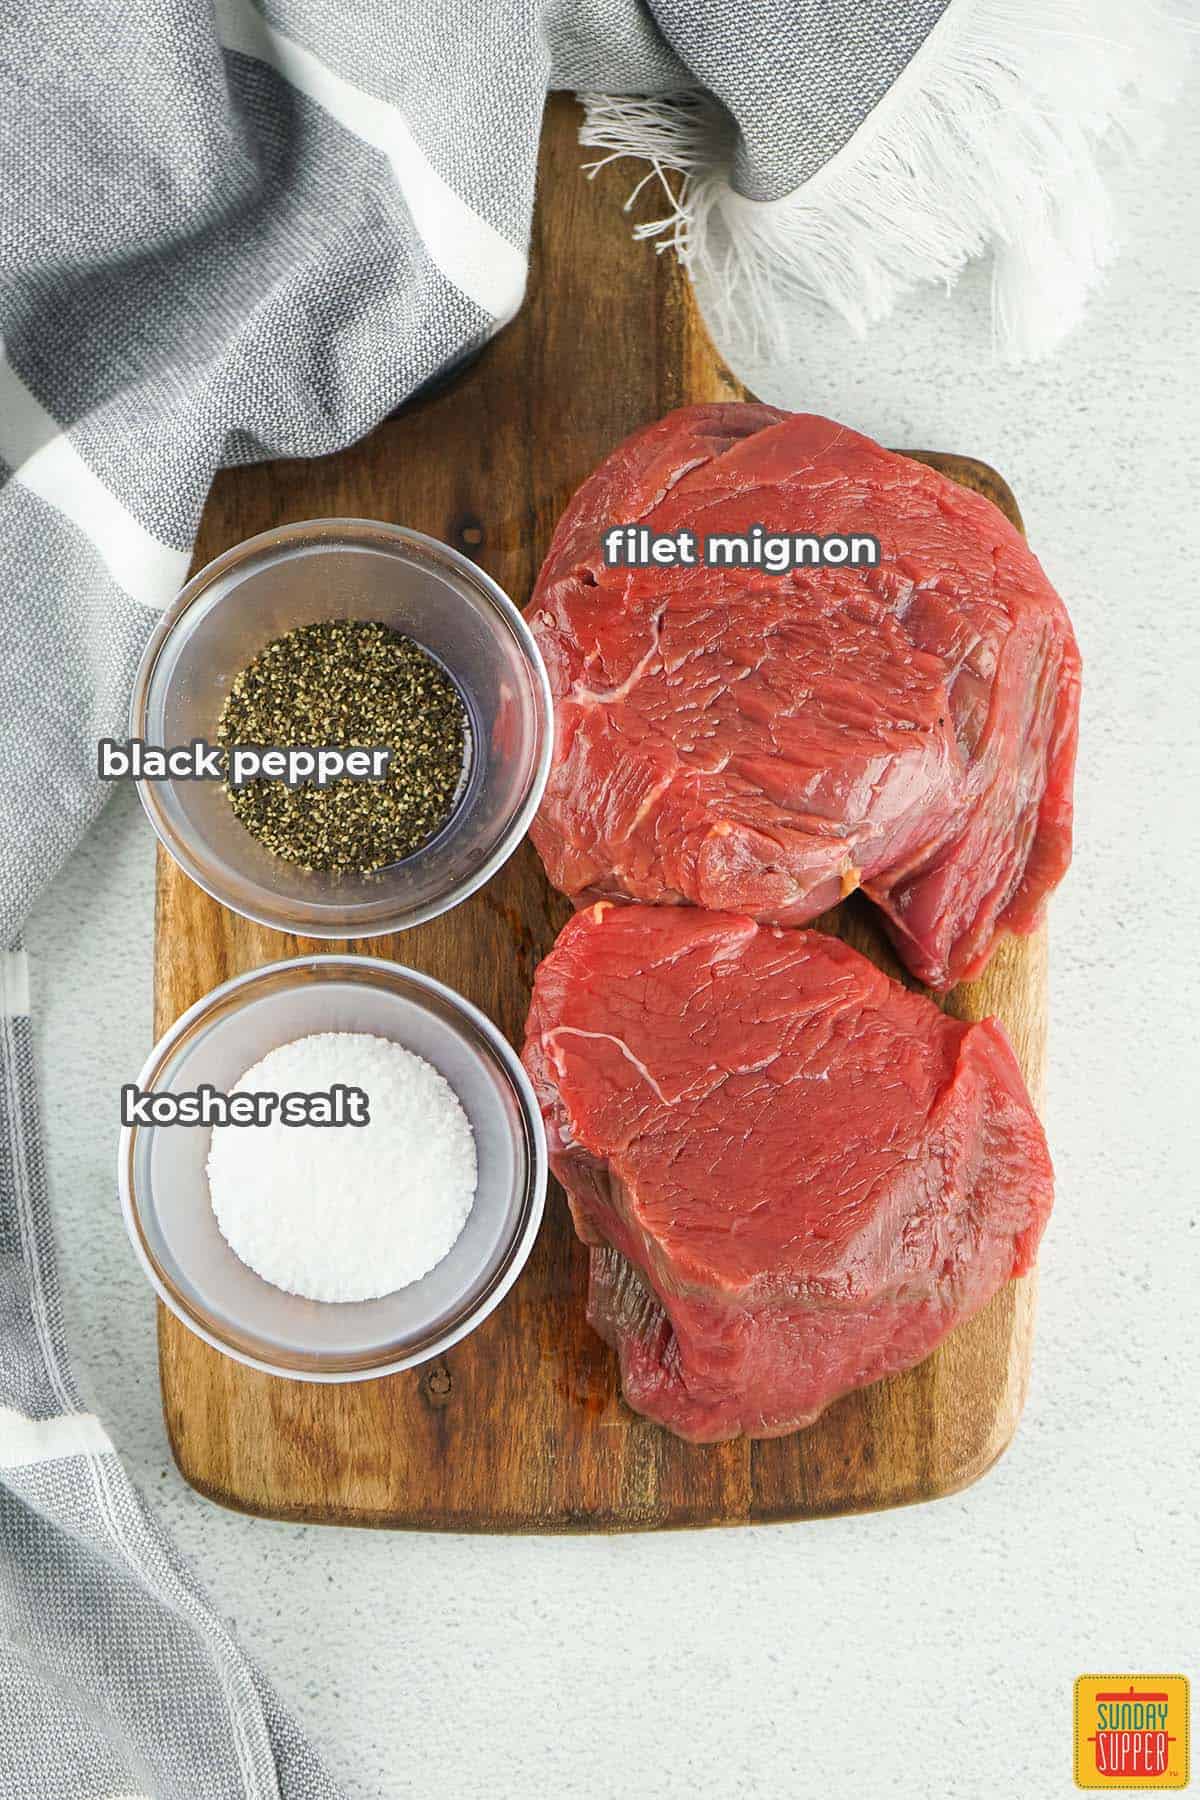 filet mignon, salt, and pepper on a cutting board with labels